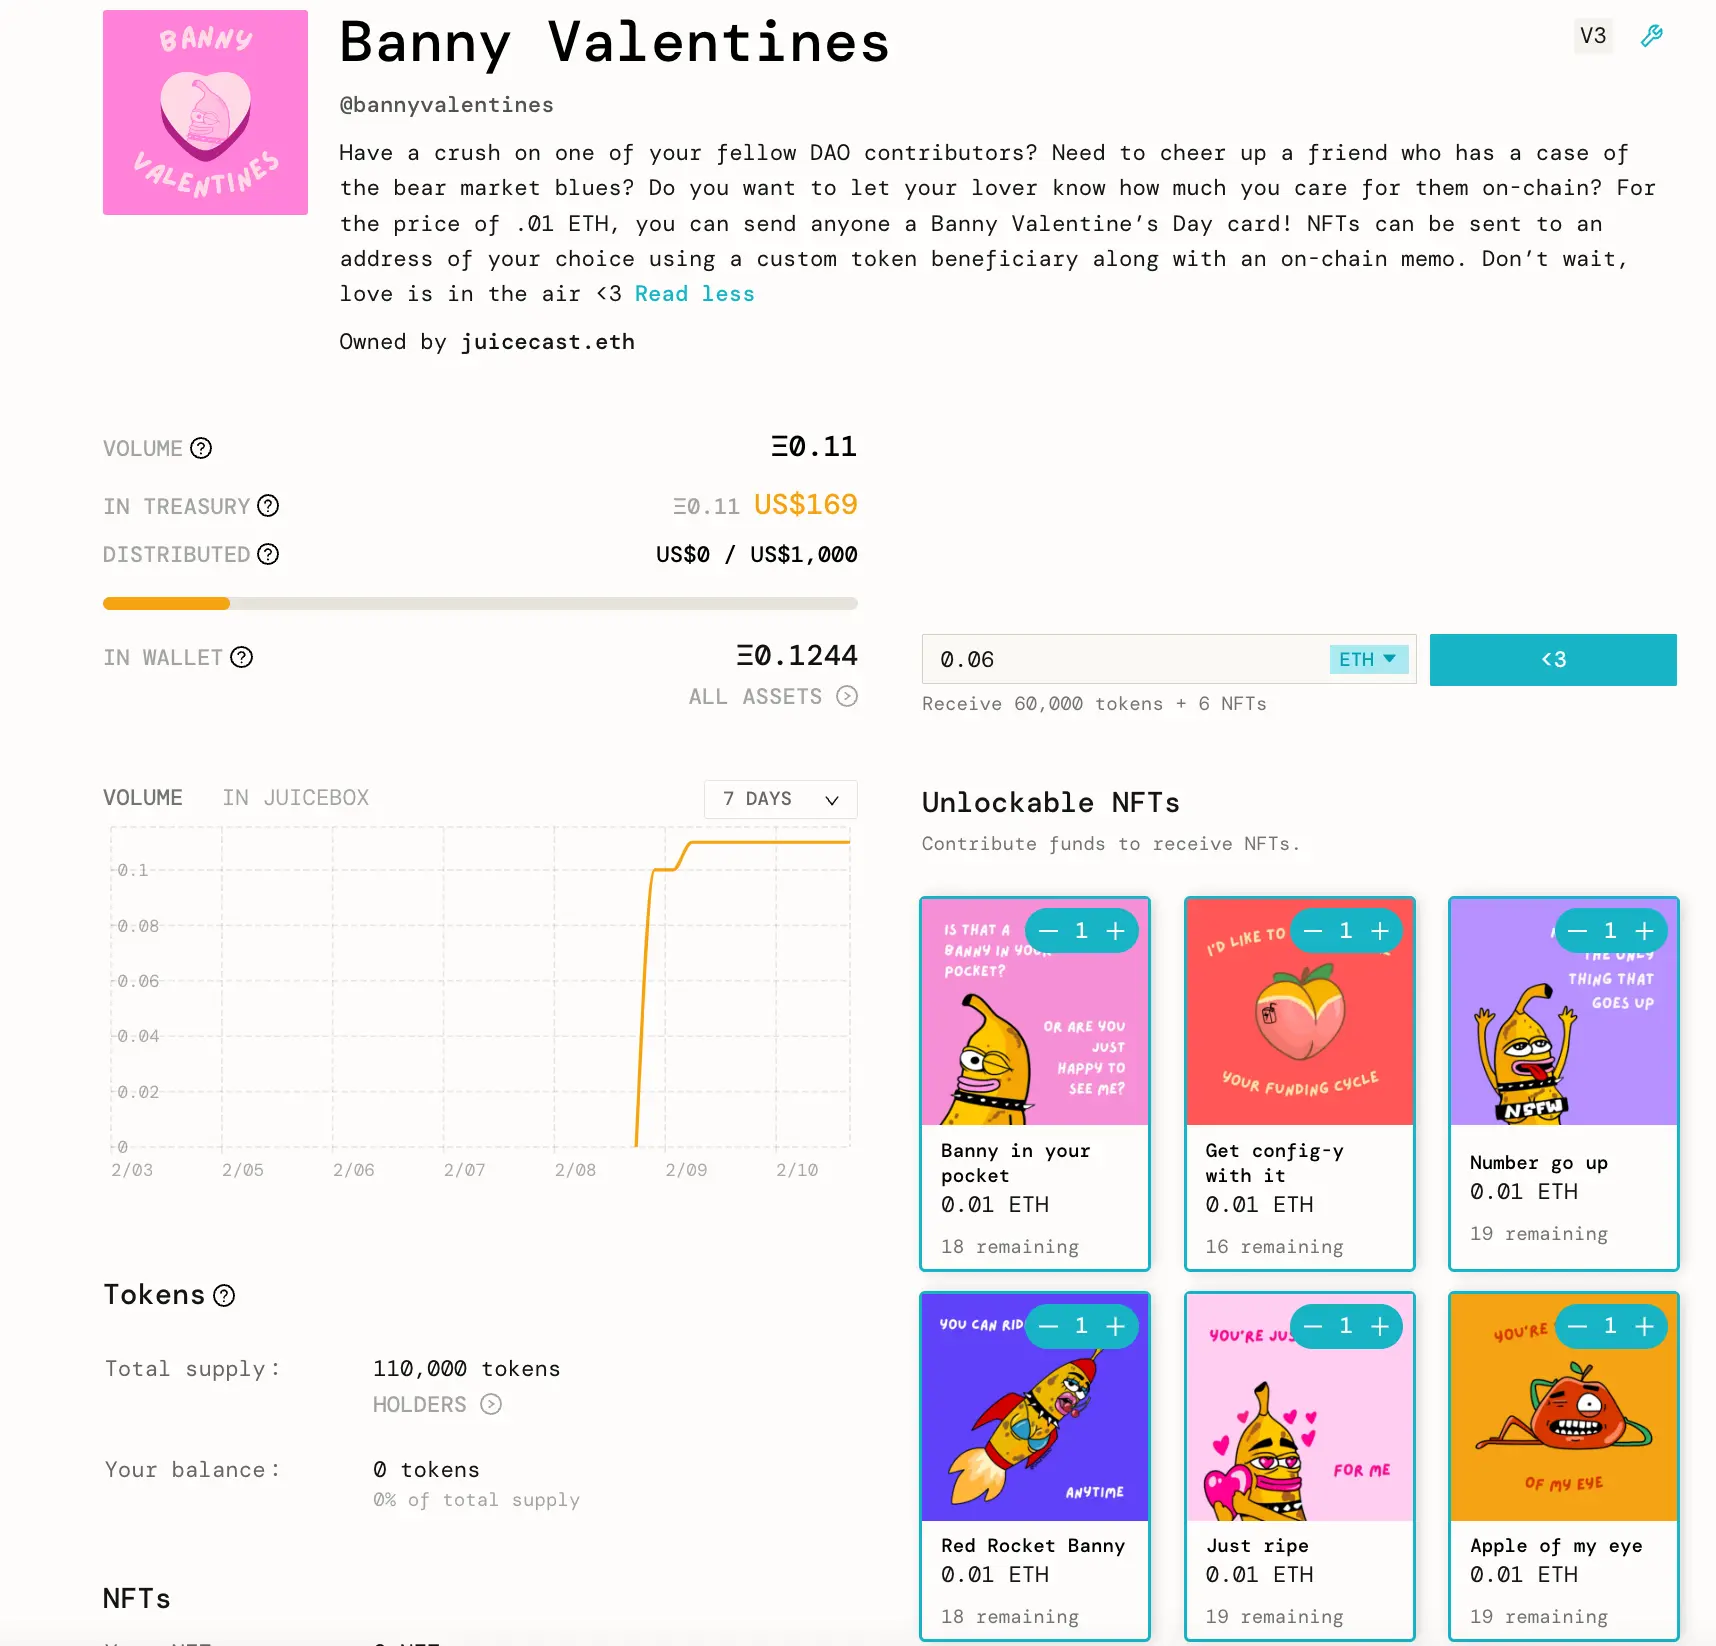 the project of Banny Valentines